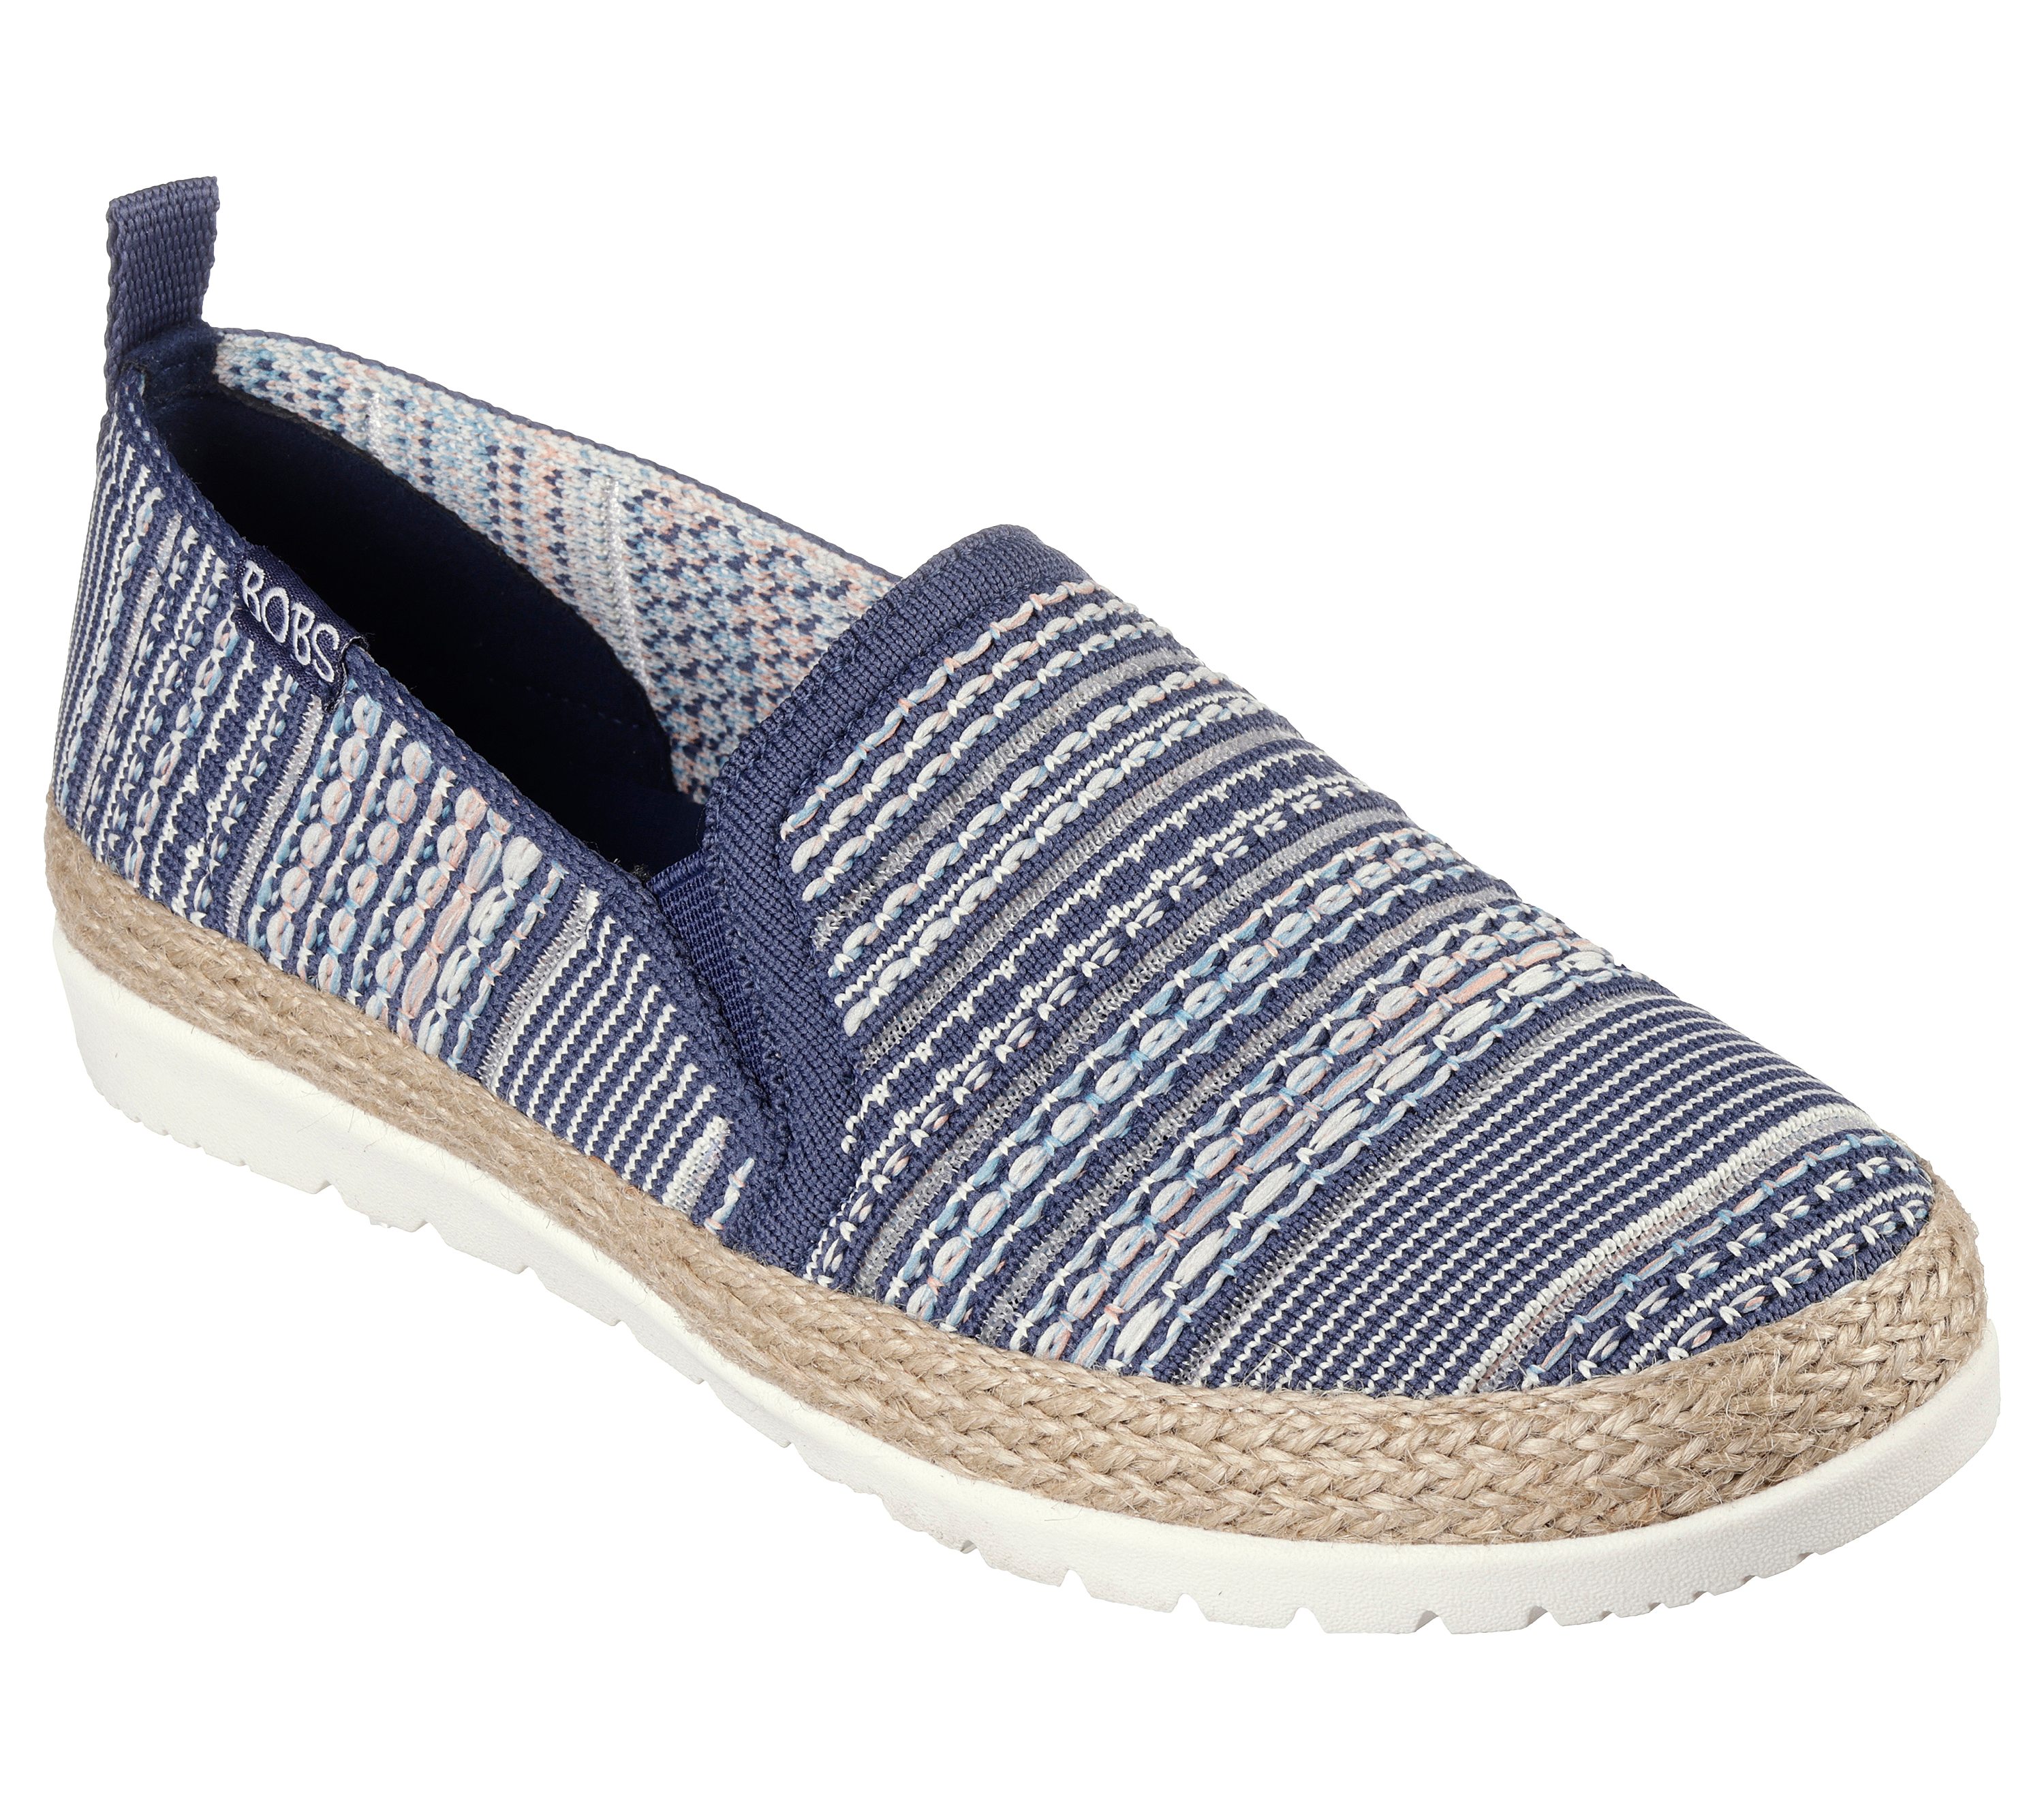 rival Incorrecto Requisitos BOBS Flexpadrille 3.0 - Island Muse | SKECHERS